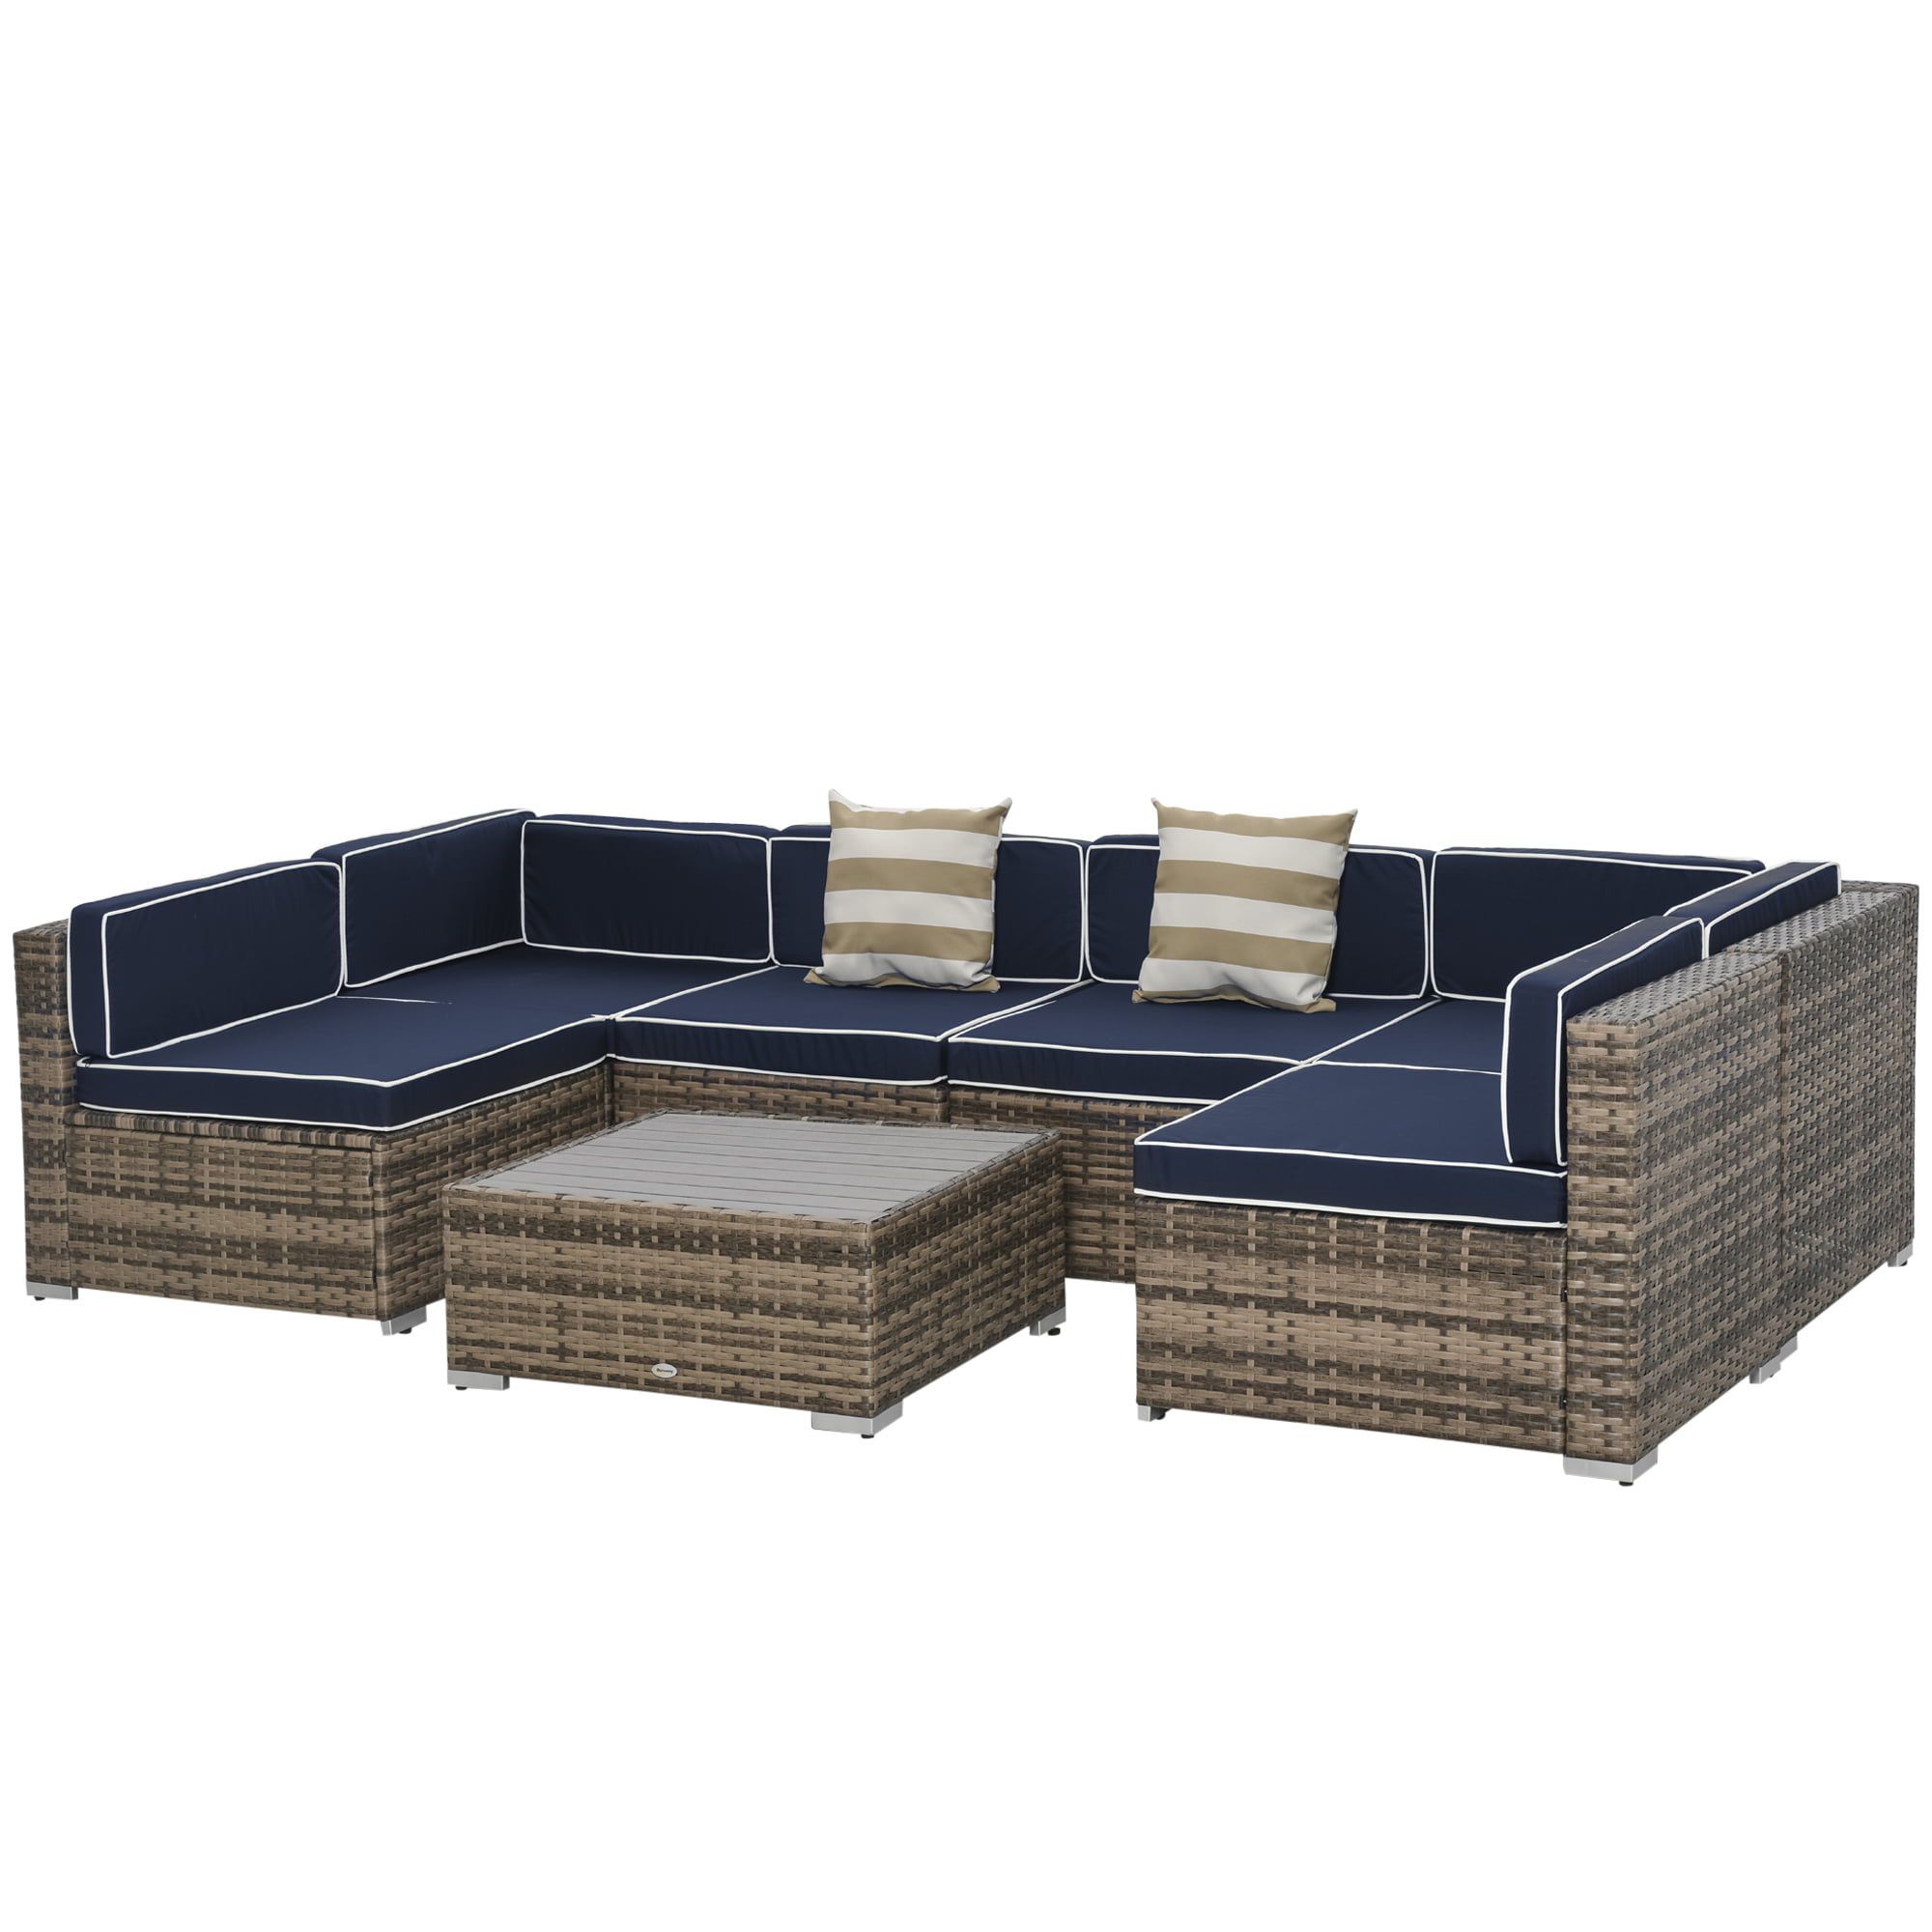 Outsunny 7 Piece Outdoor Patio Rattan Wicker Sofa Sectional Conversation Furniture Set 